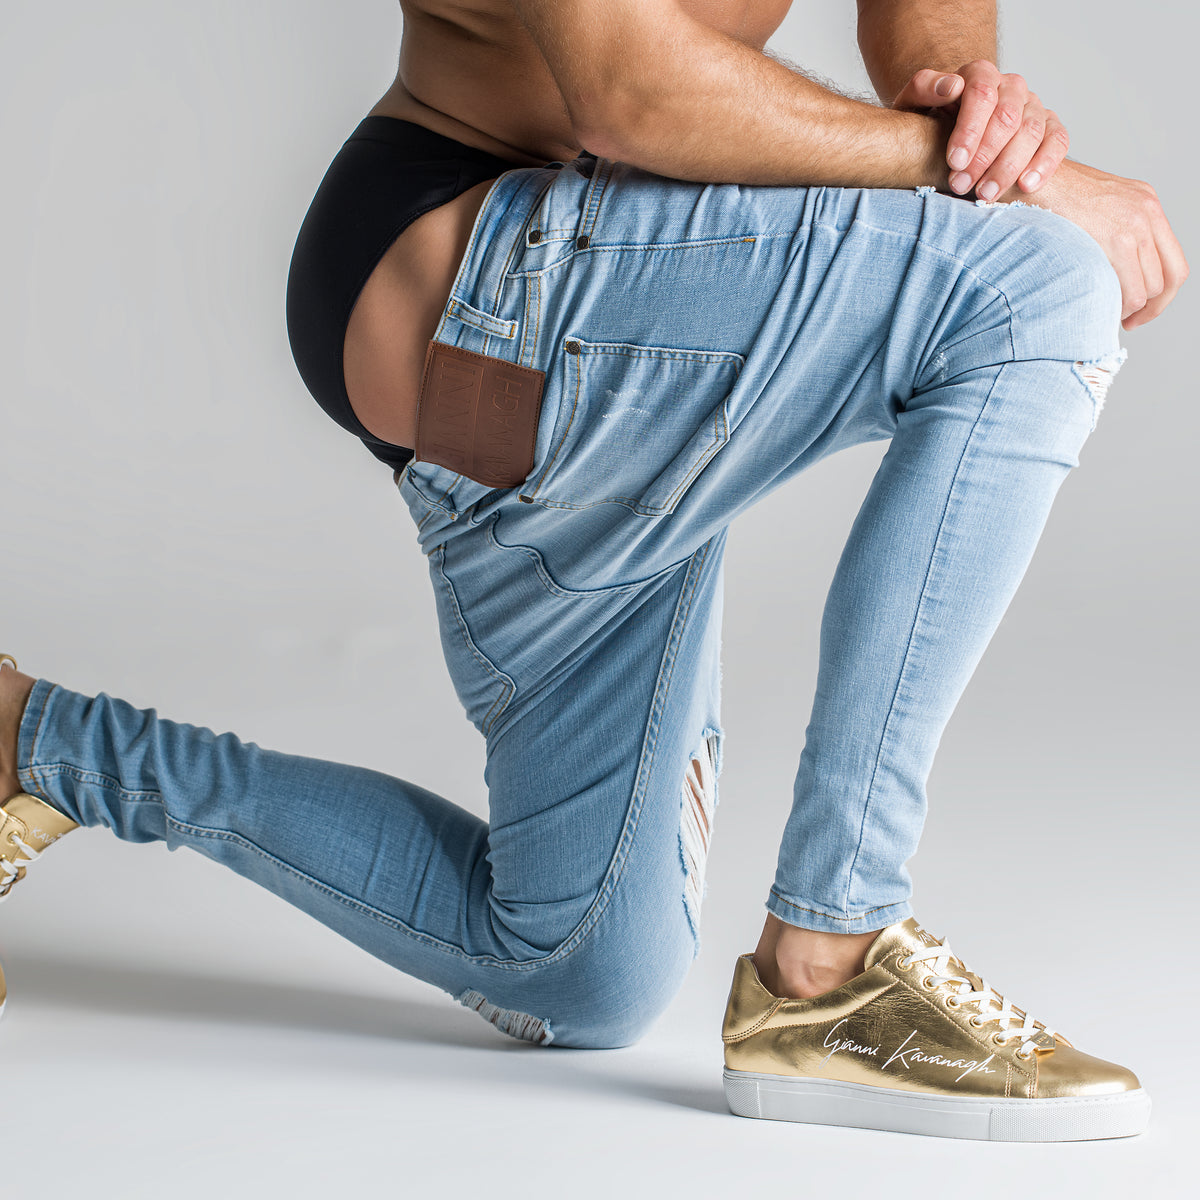 The Different Types of Jeans for Both Men and Women